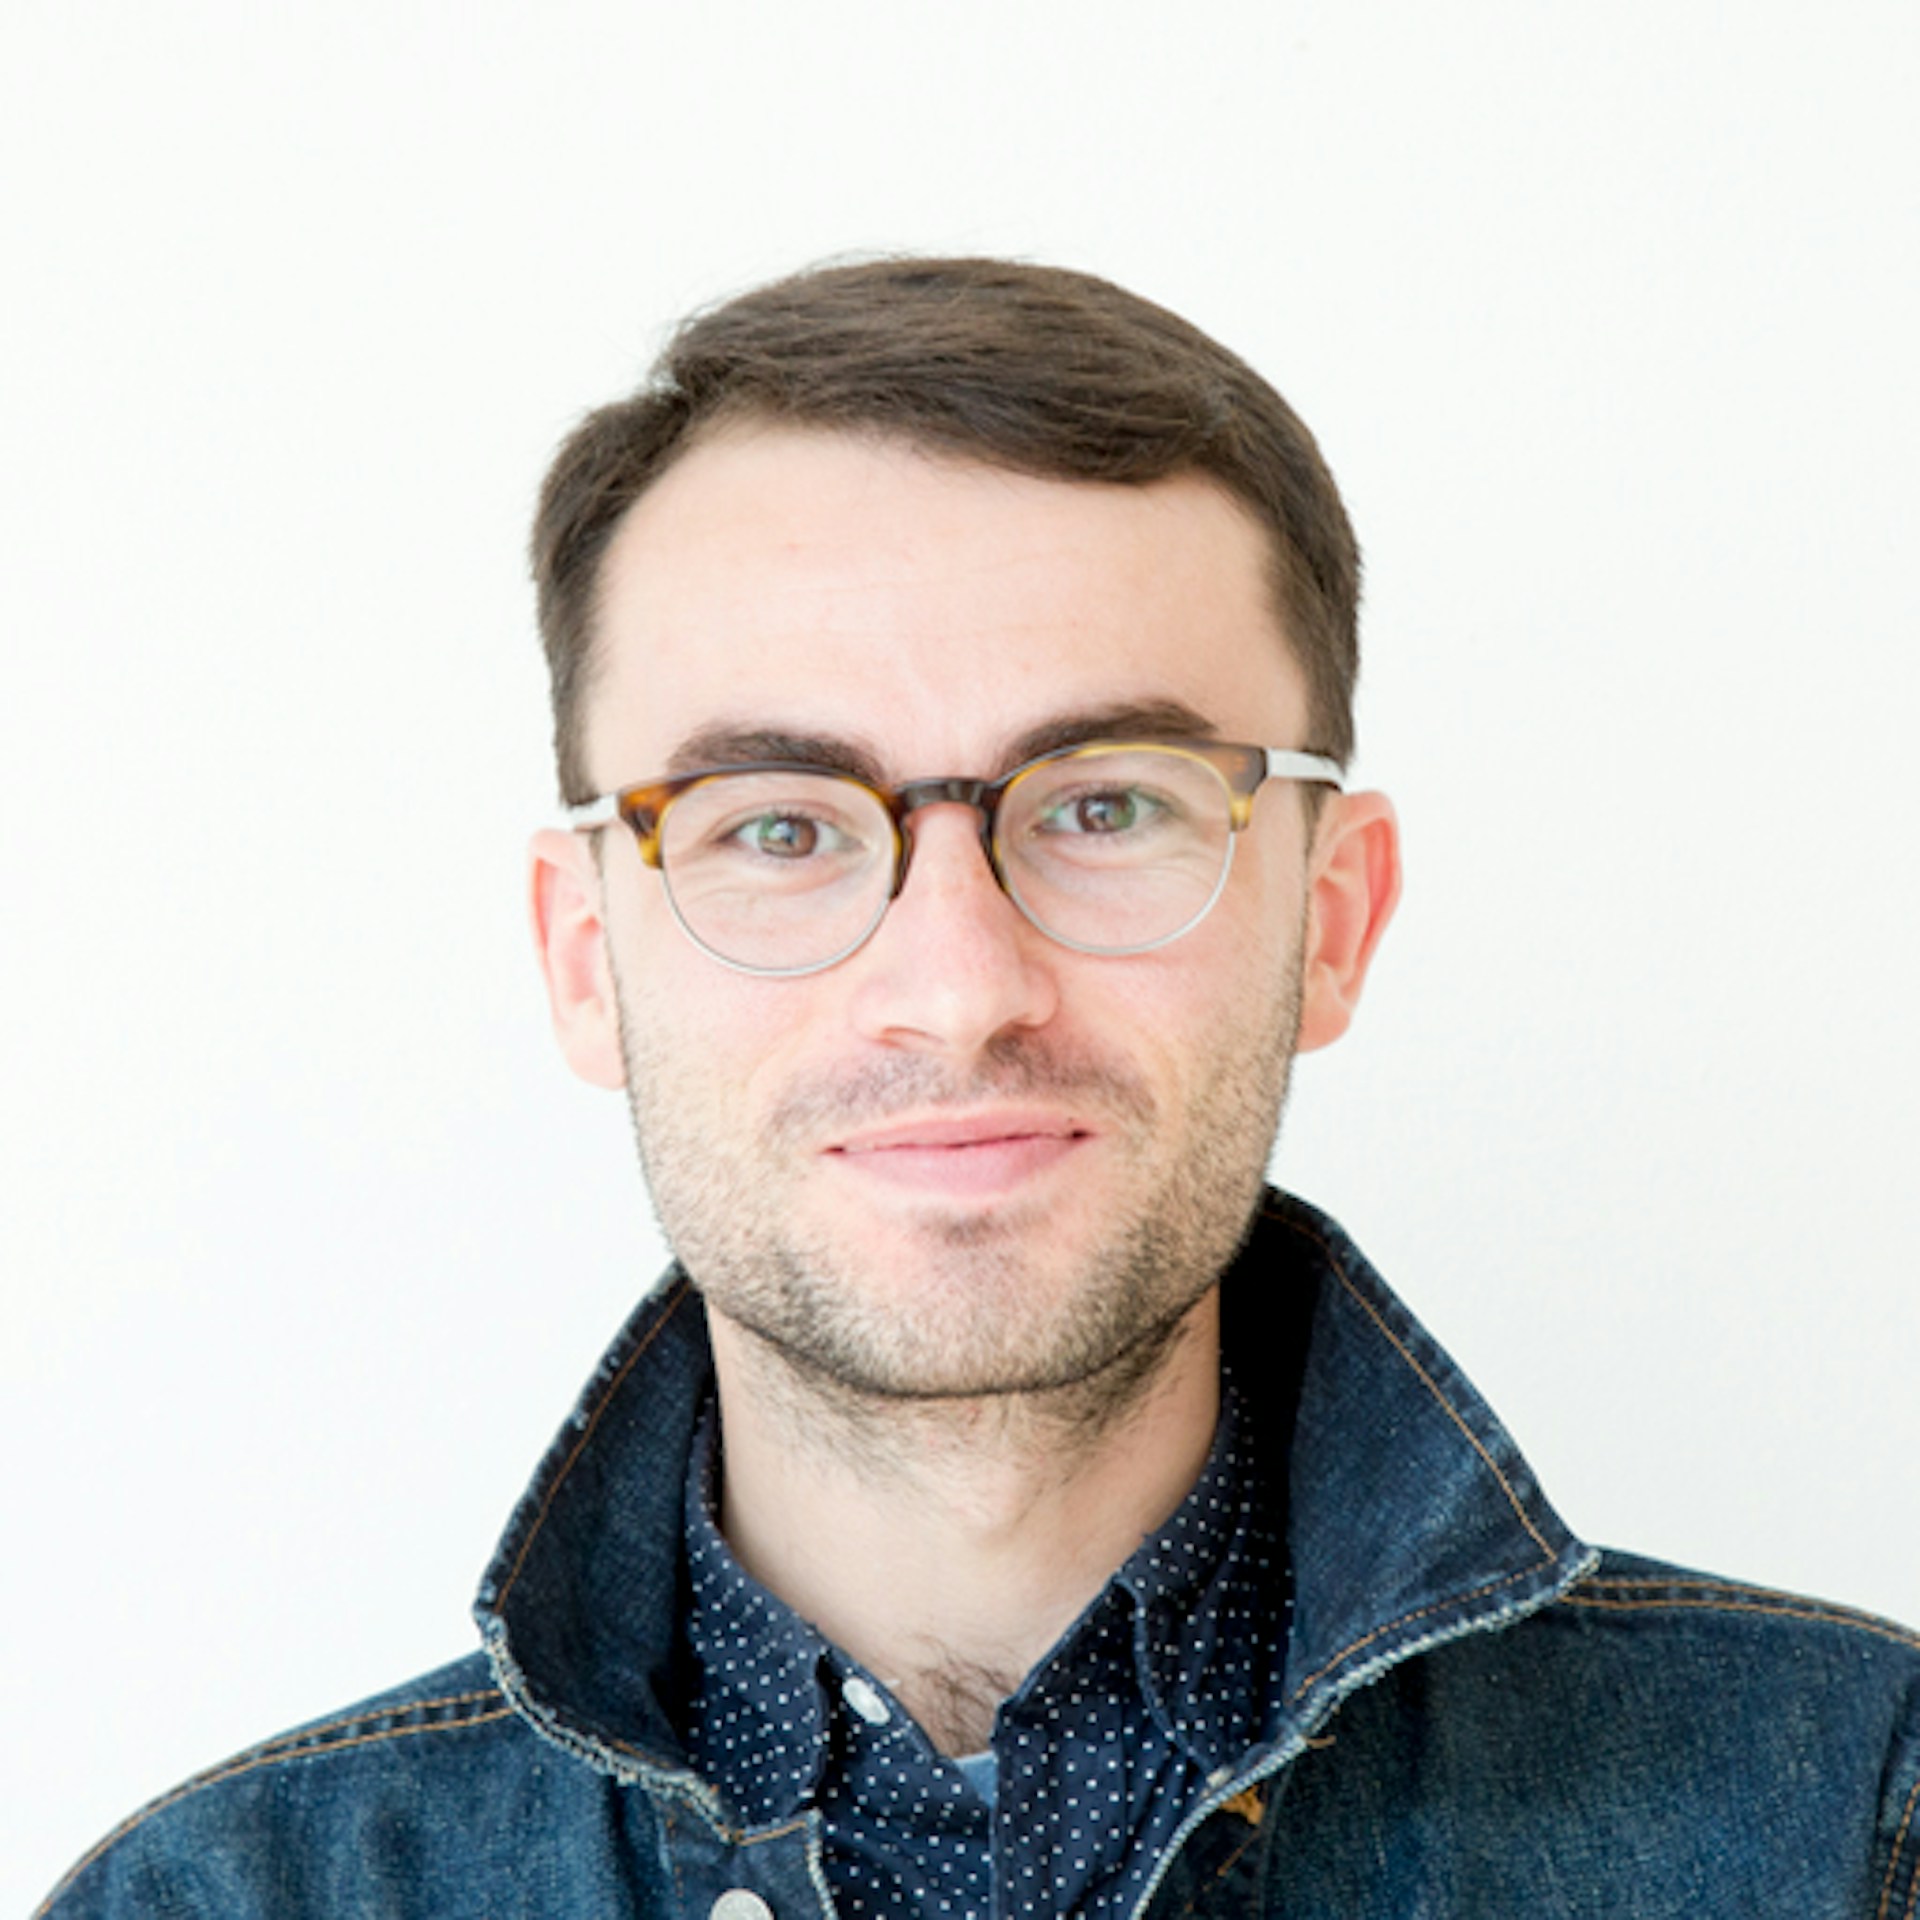 TJ Kiely - Director of Corporate Marketing & Global Content at Meltwater